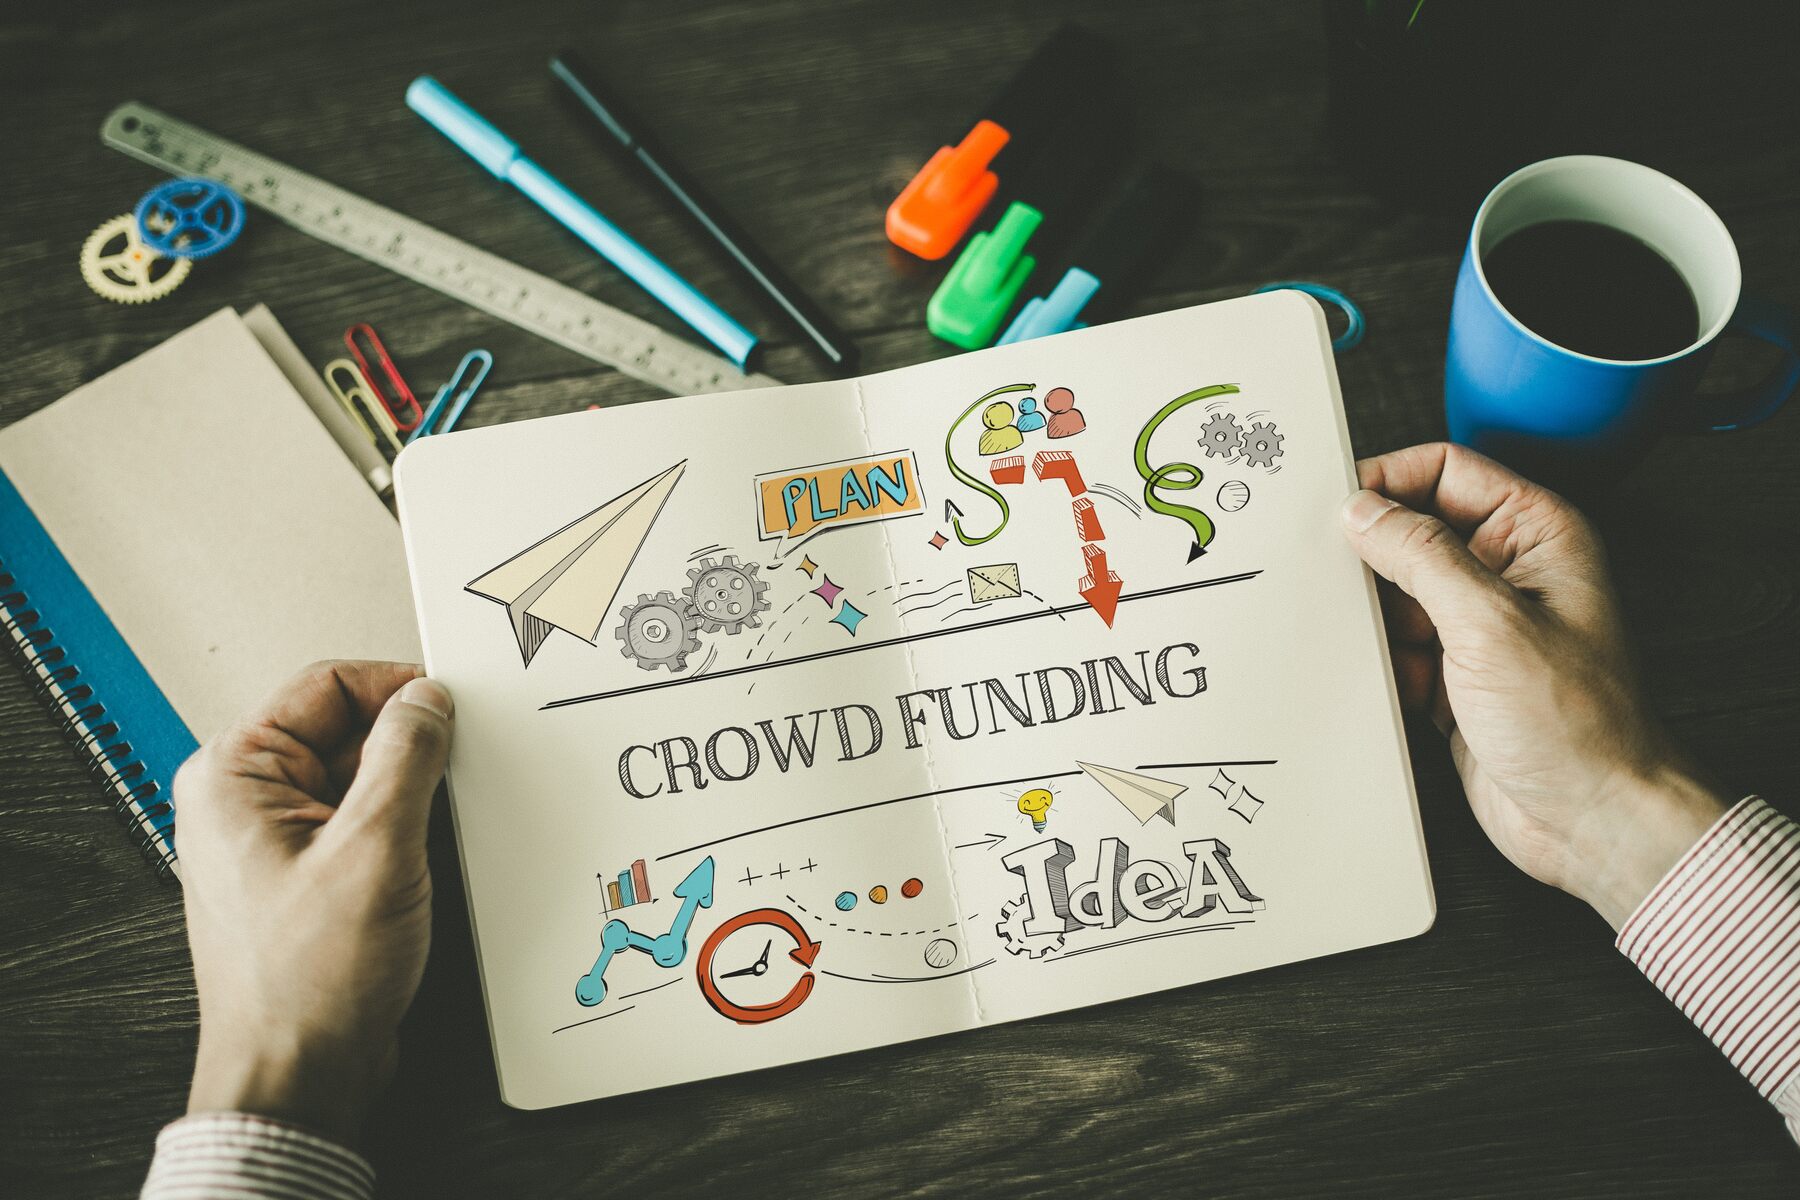 What Is Crowdfunding?